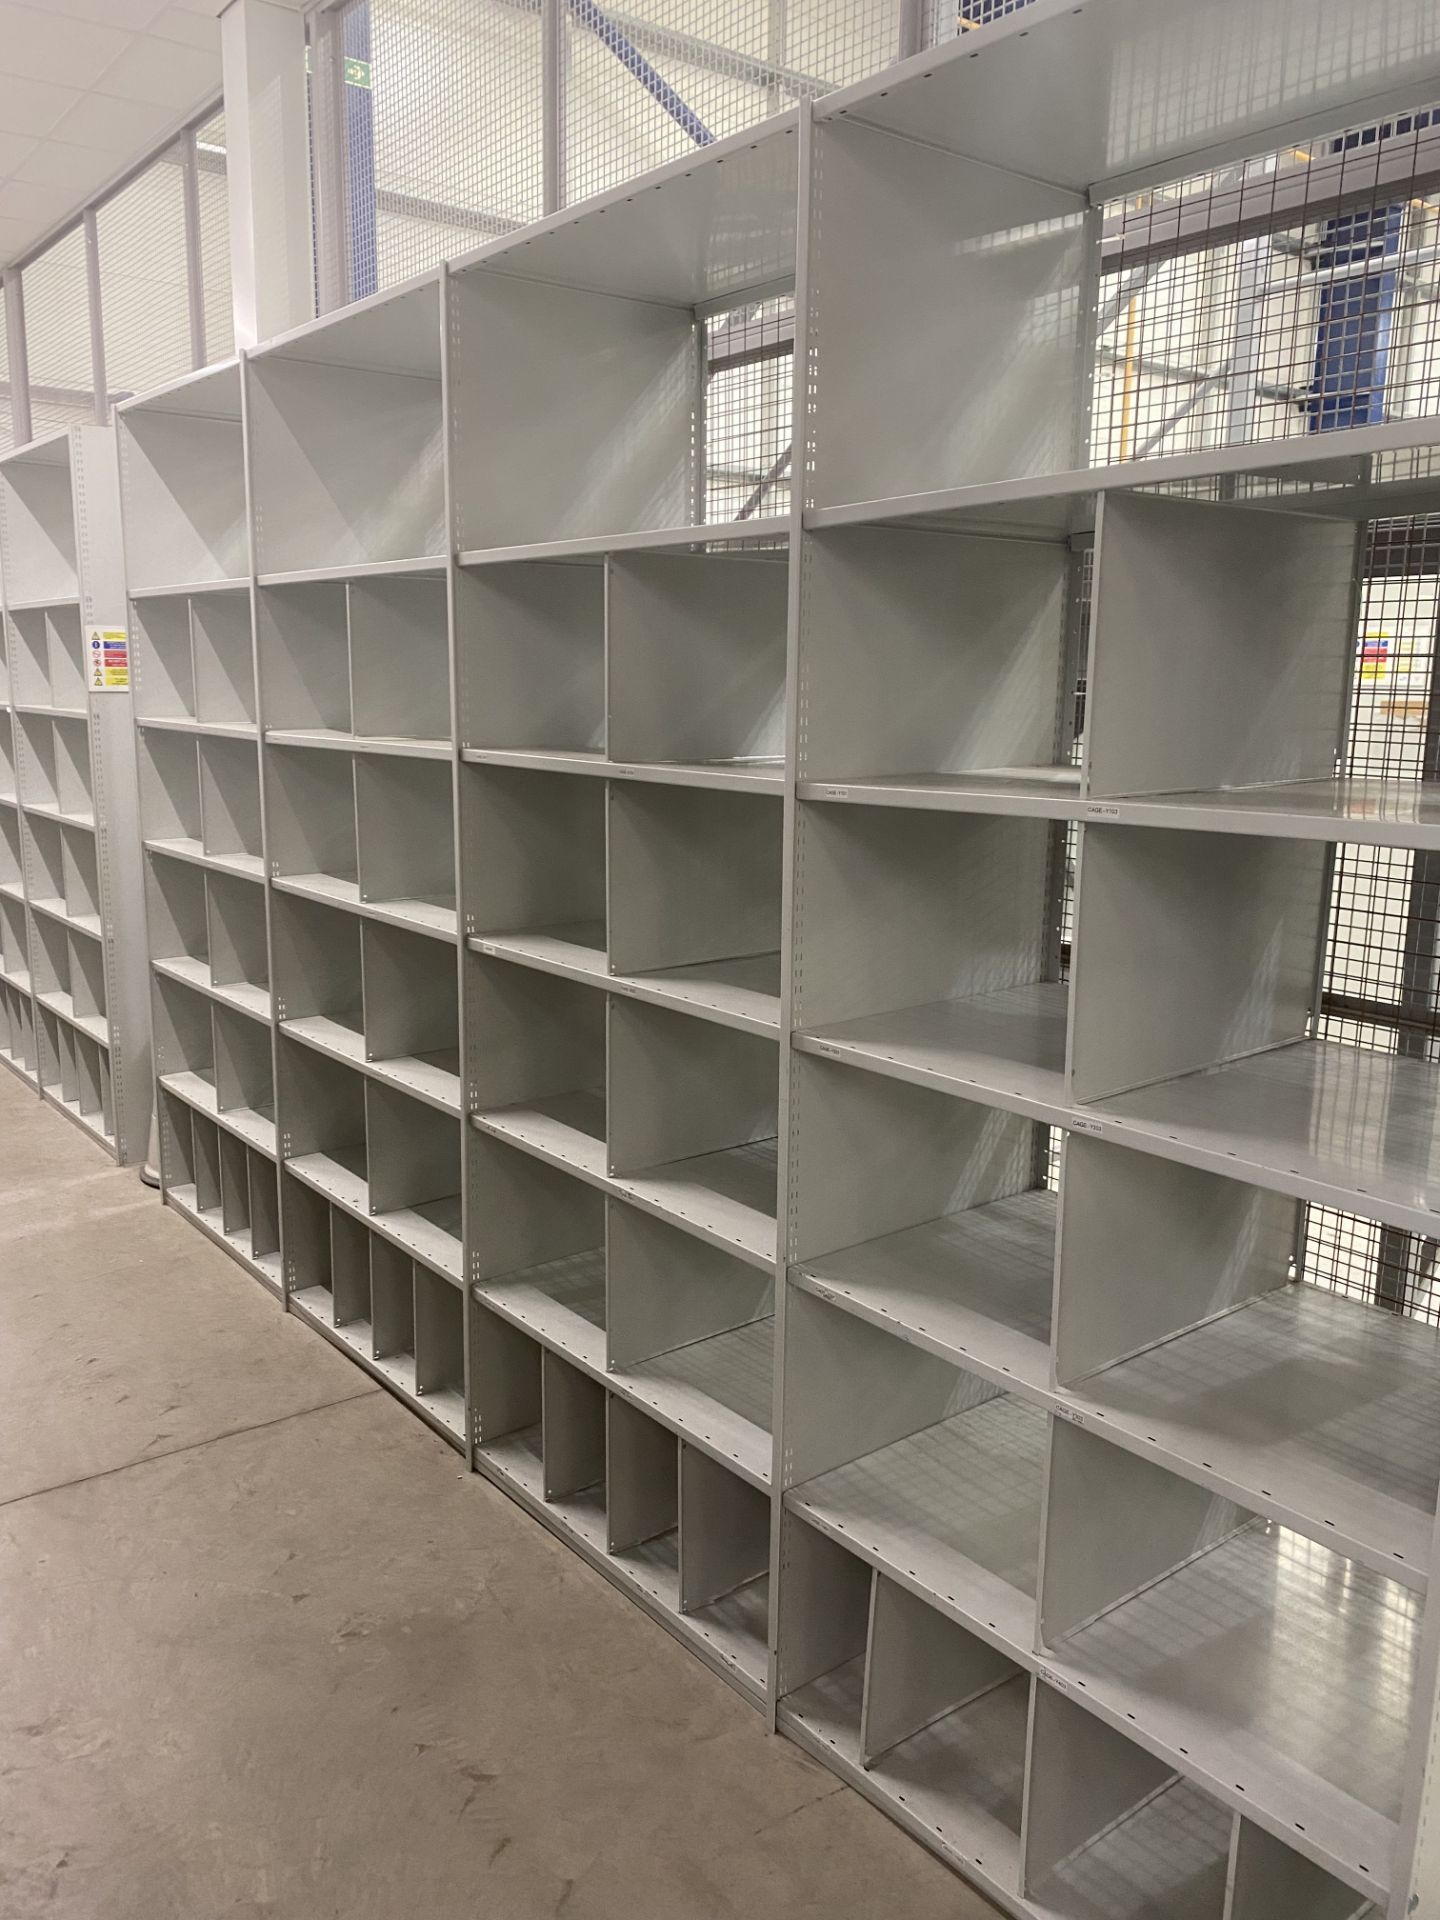 4 BAYS X ADJUSTABLE WAREHOUSE SHELVING - (CAN BE DISMANTLED)